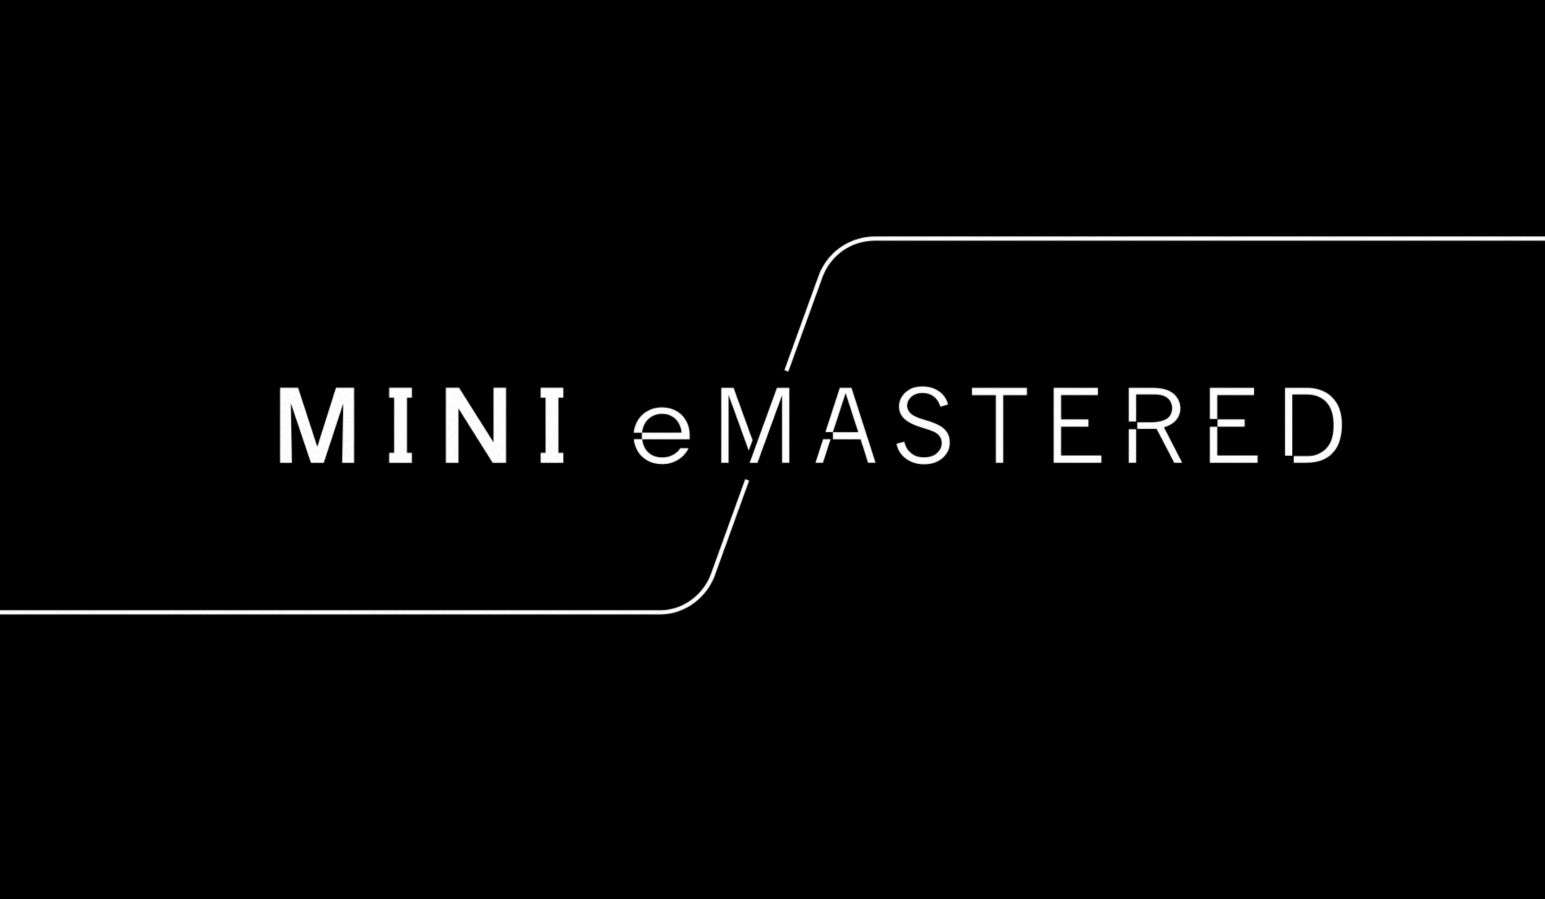 Coming Soon: Mini eMastered by David Brown Automotive – An Icon Remastered